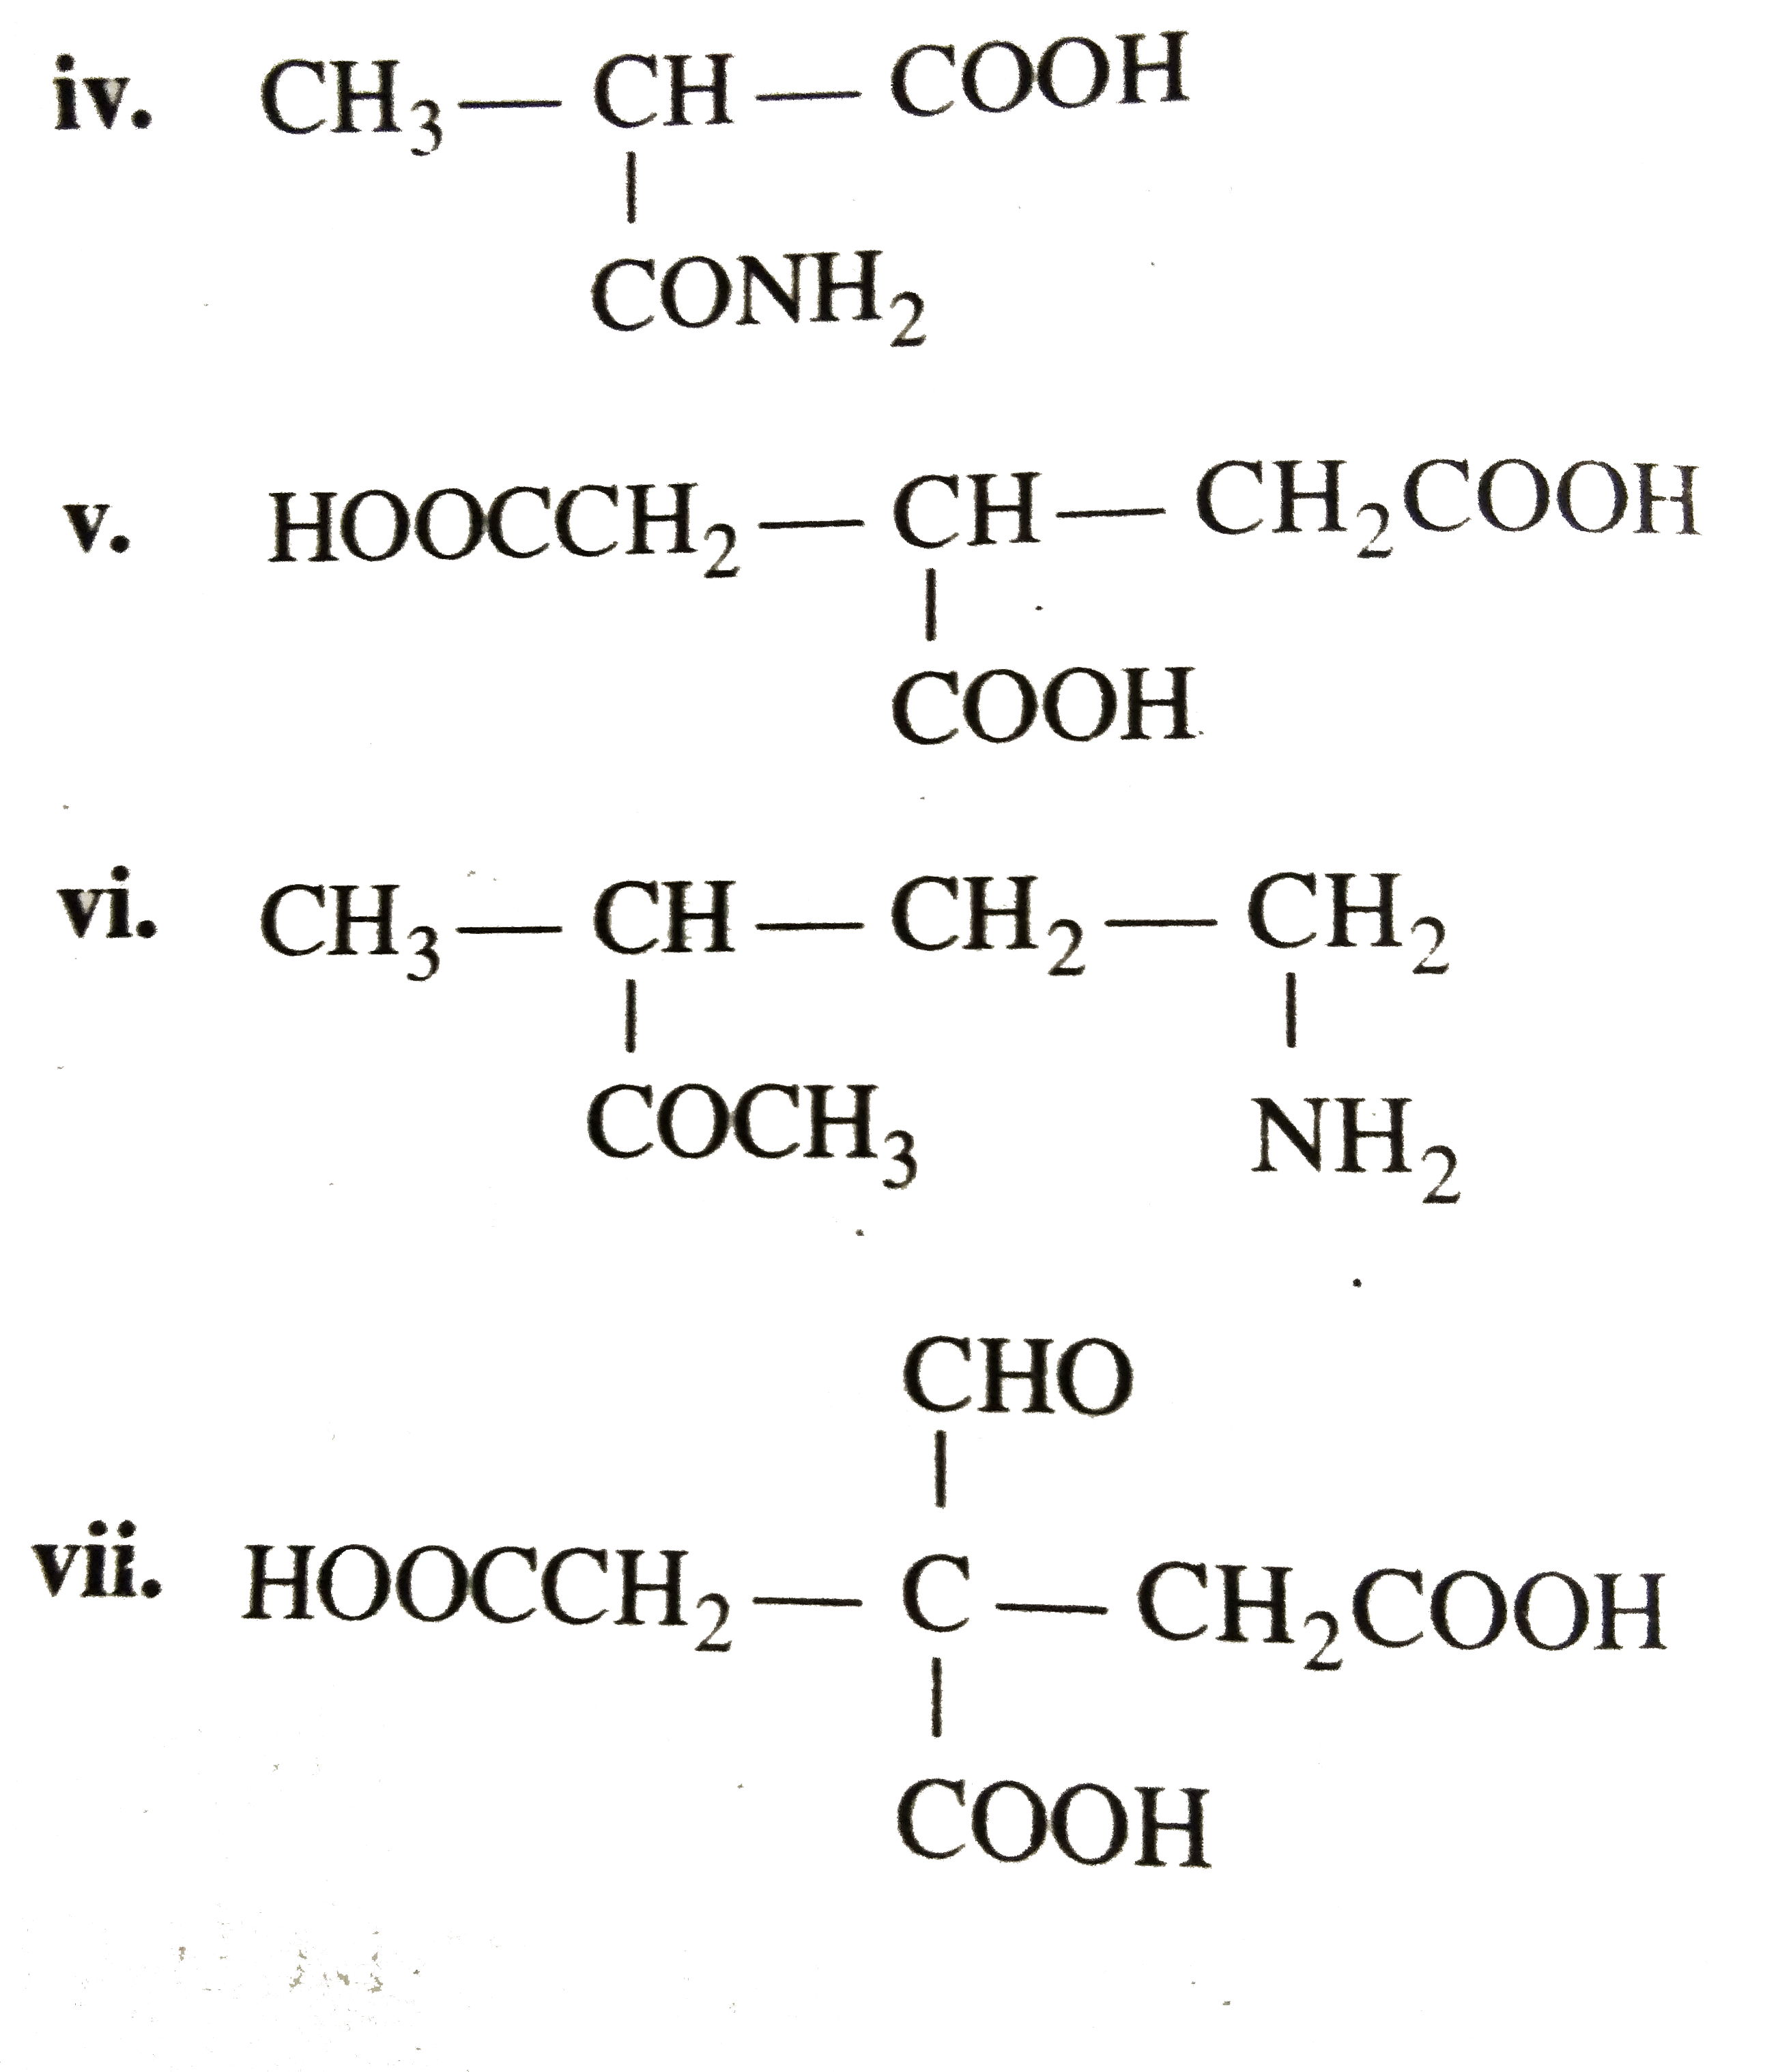 Give the IUPAC names for the following polyfunctional compounds:   i. CH(3)CH(2)O-CH(2)-CHOH-CH(3)   ii. CH(3)-underset(NO(2))underset(|)(C )H-CH(2)-underset(OH)underset(|)overset(CH(3))overset(|)(C )-CH(3)   iii. CH(2)=overset(H(3)C)overset(|)(C )-overset(OH)overset(|)(C )H-CH(2)CN